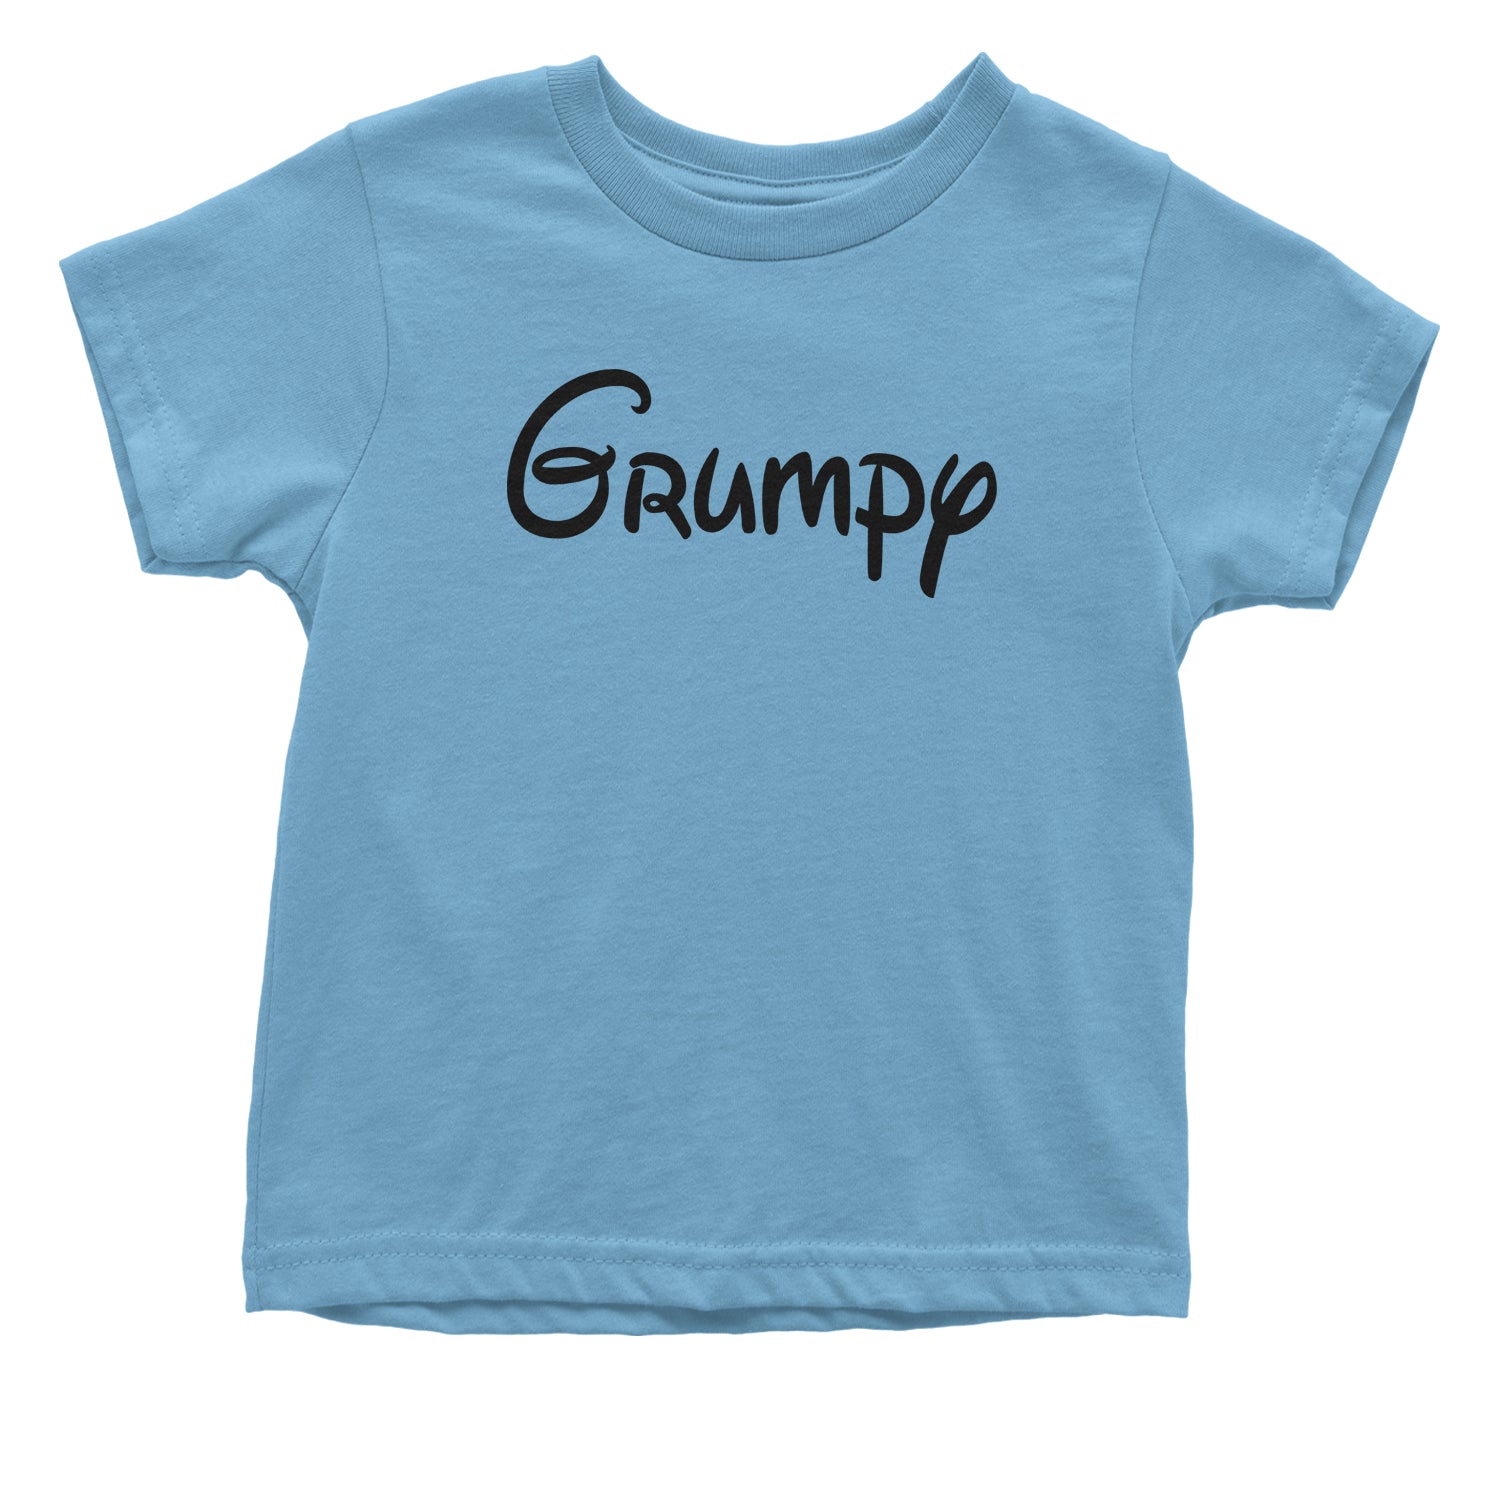 Grumpy - 7 Dwarfs Costume Toddler T-Shirt and, costume, dwarfs, group, halloween, matching, seven, snow, the, white by Expression Tees